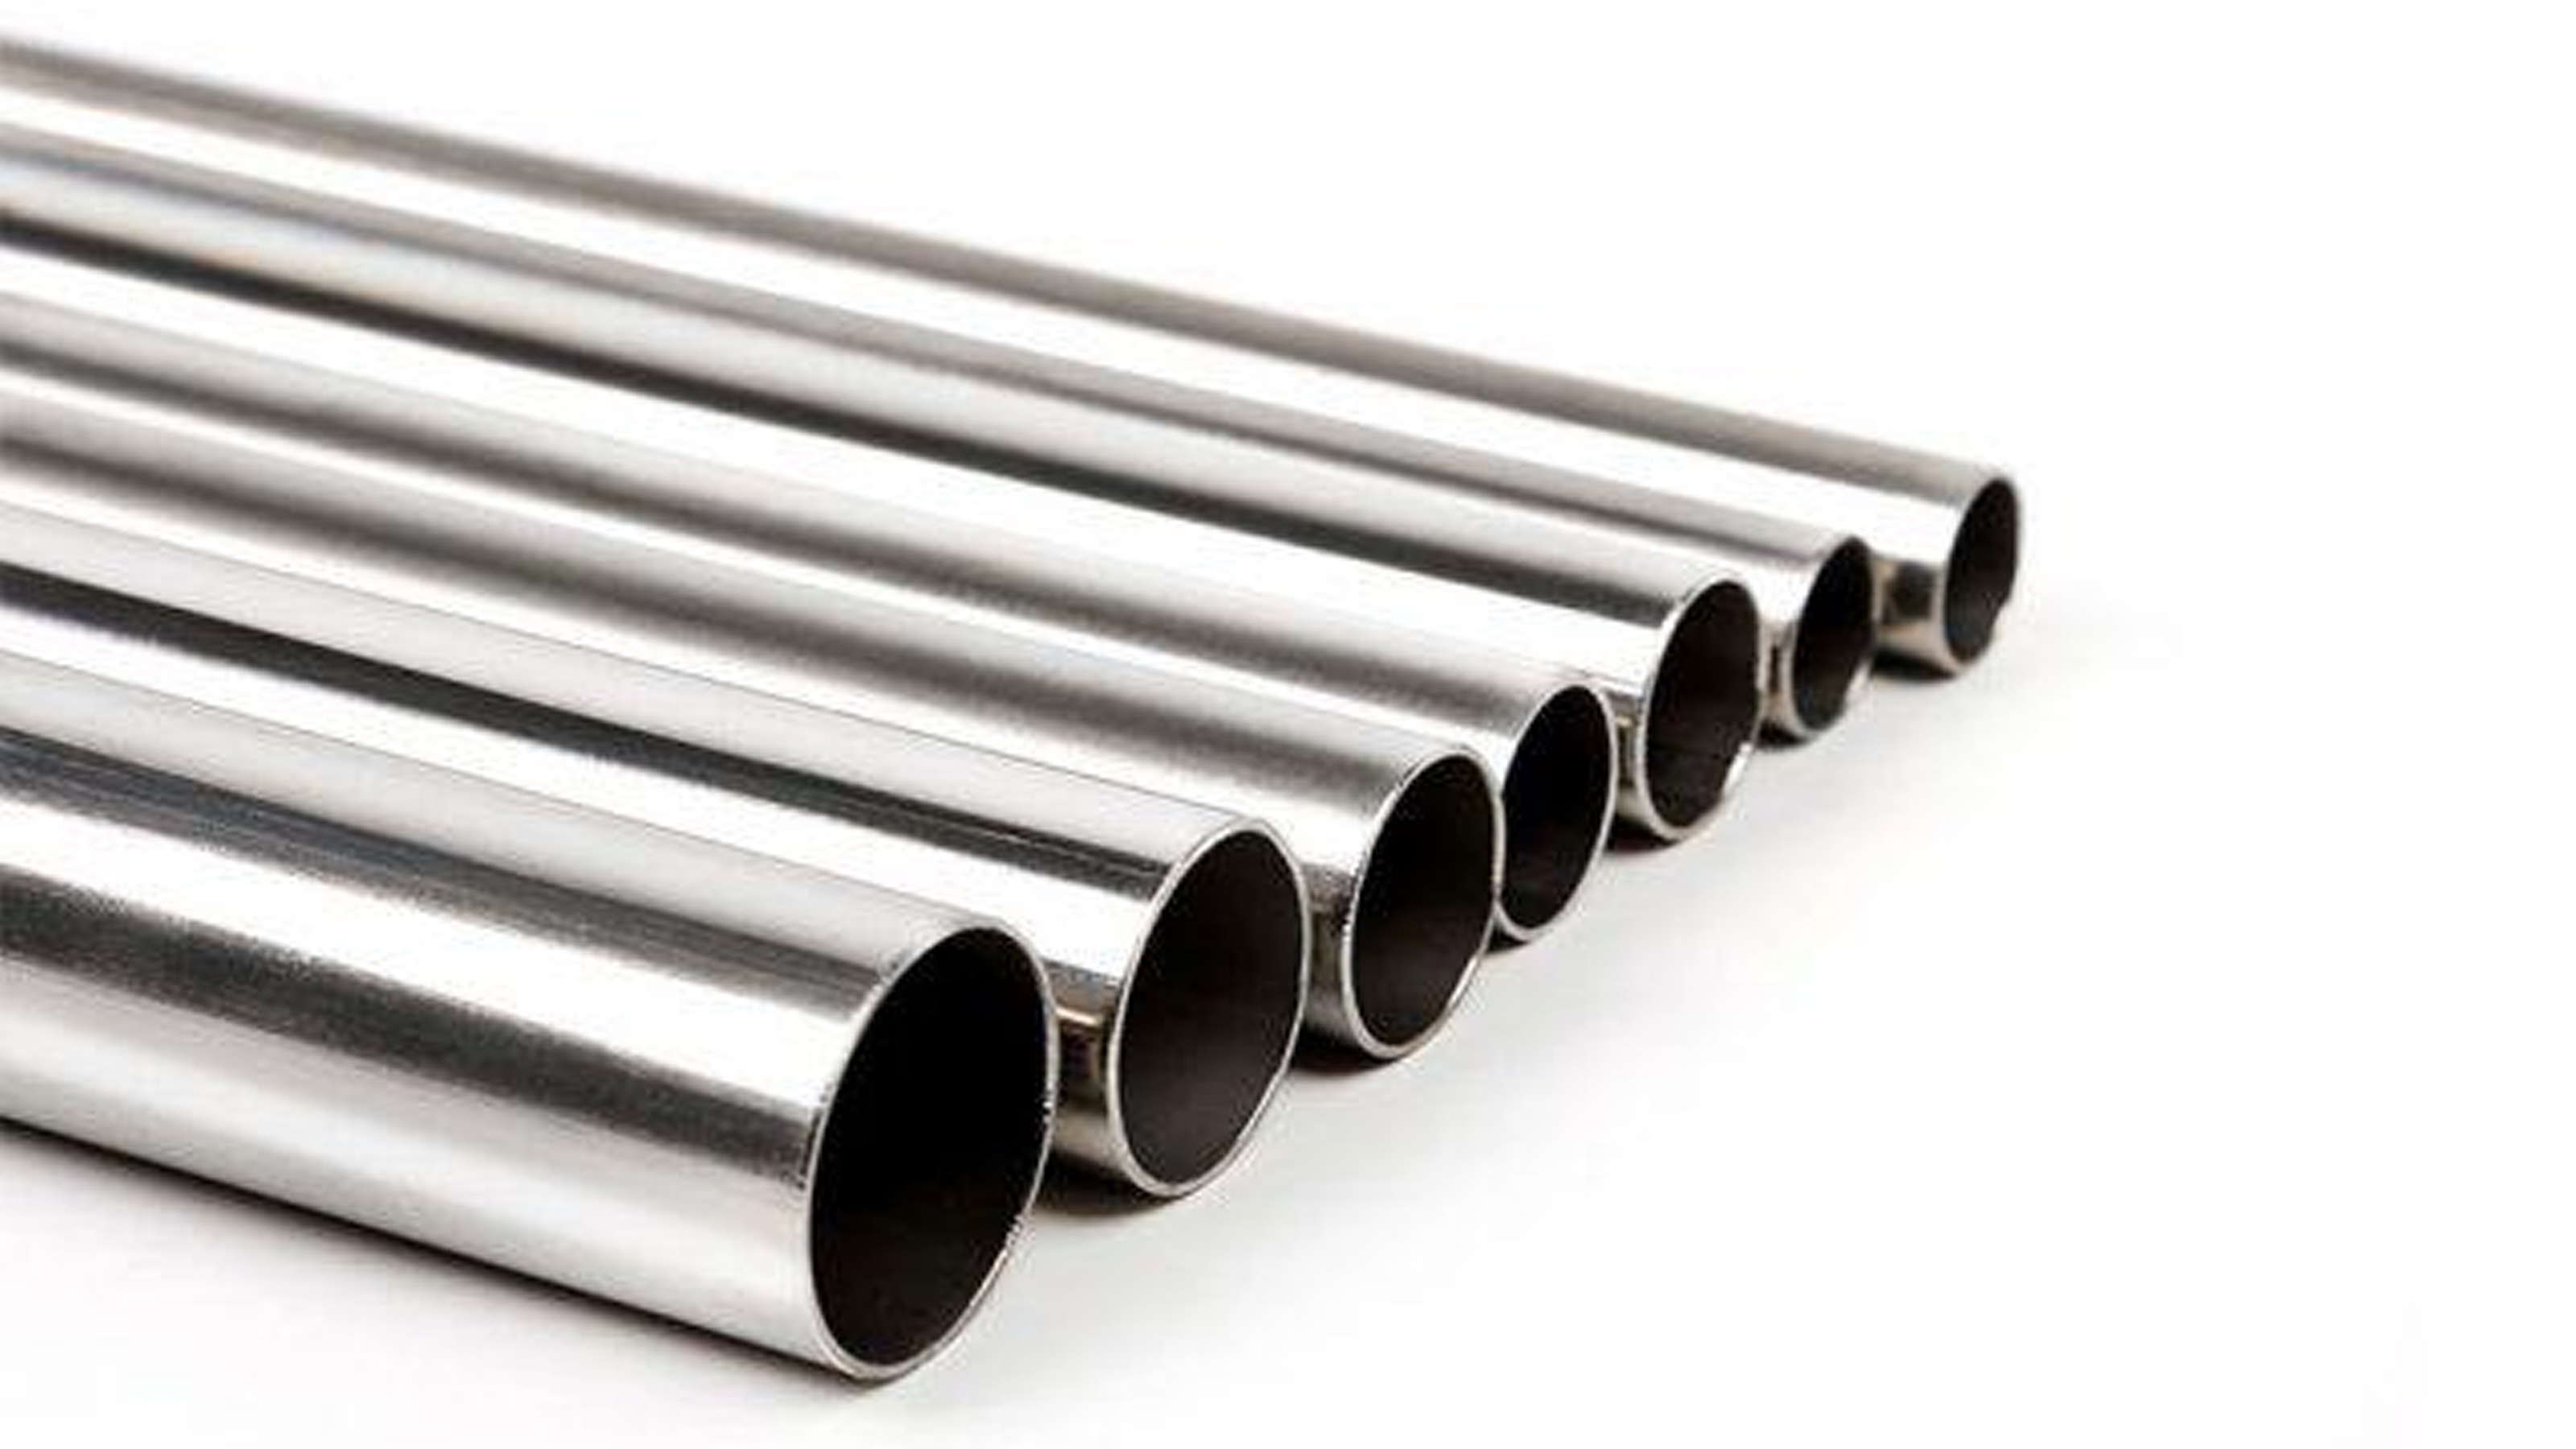 16x1 car engine oil pipe